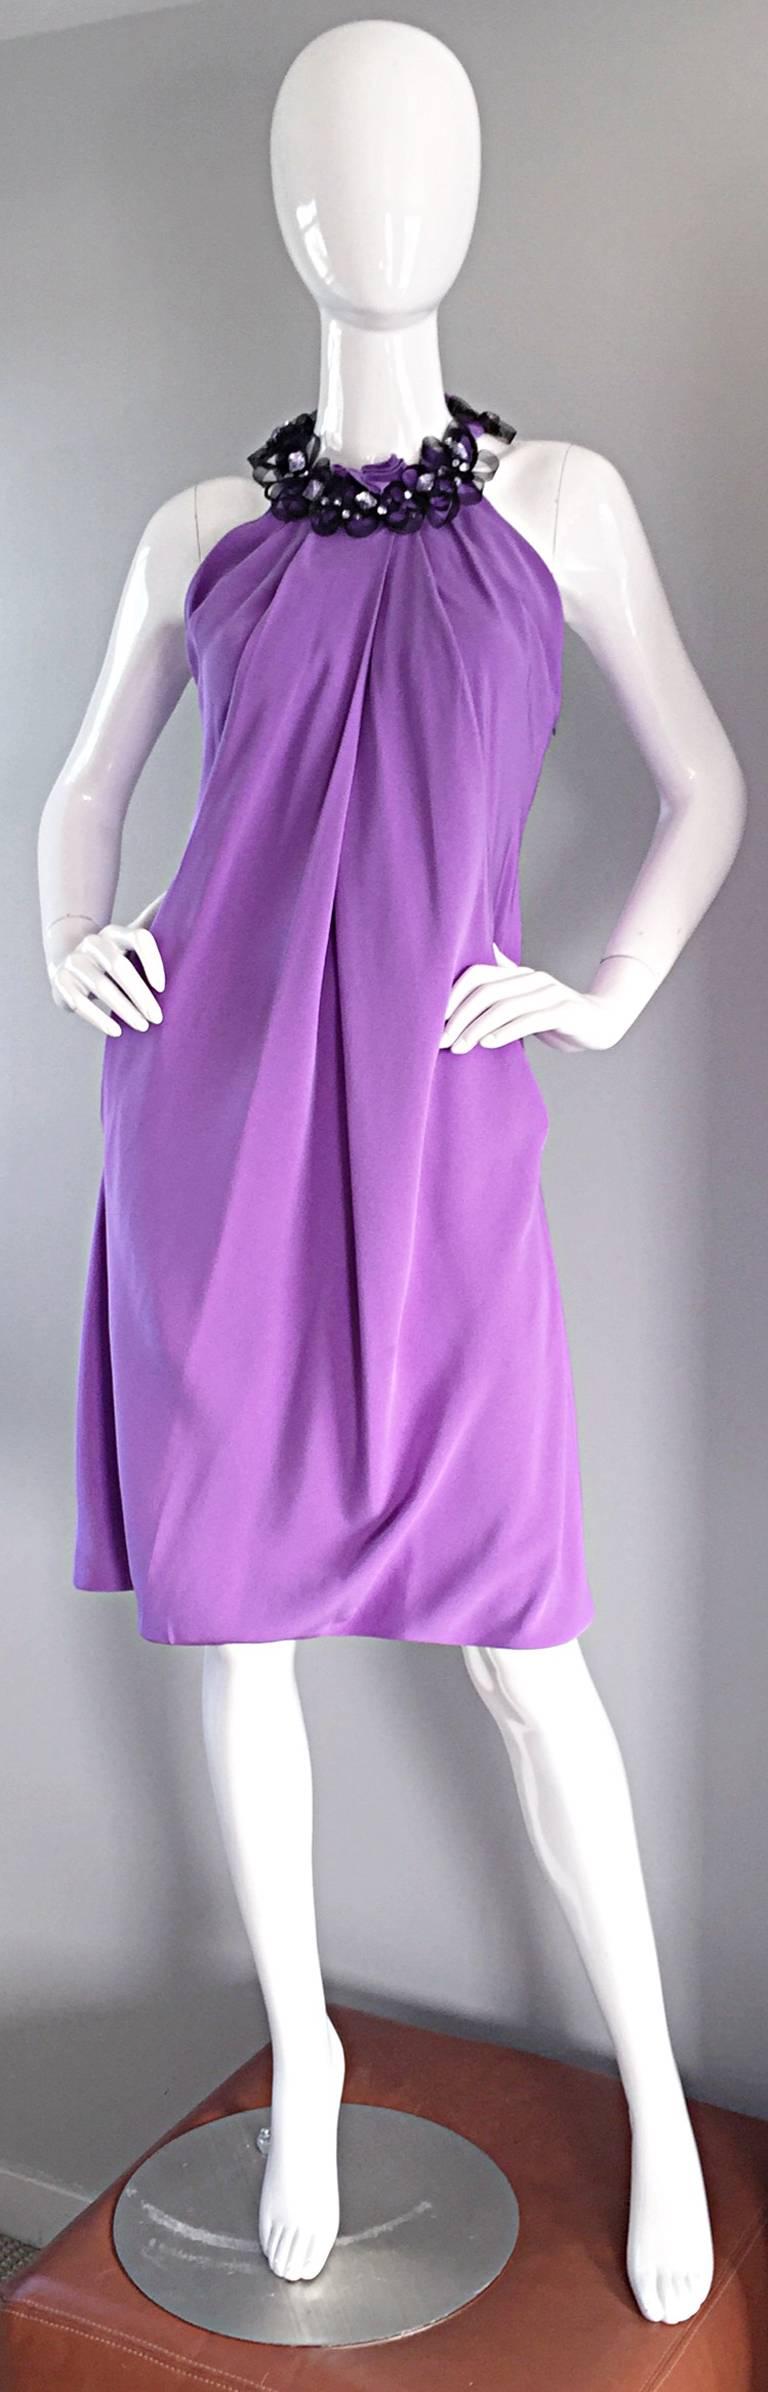 Chic Pamella Roland Light Purple Lilac Beaded Bib Collar Bubble Grecian Dress In Excellent Condition For Sale In San Diego, CA